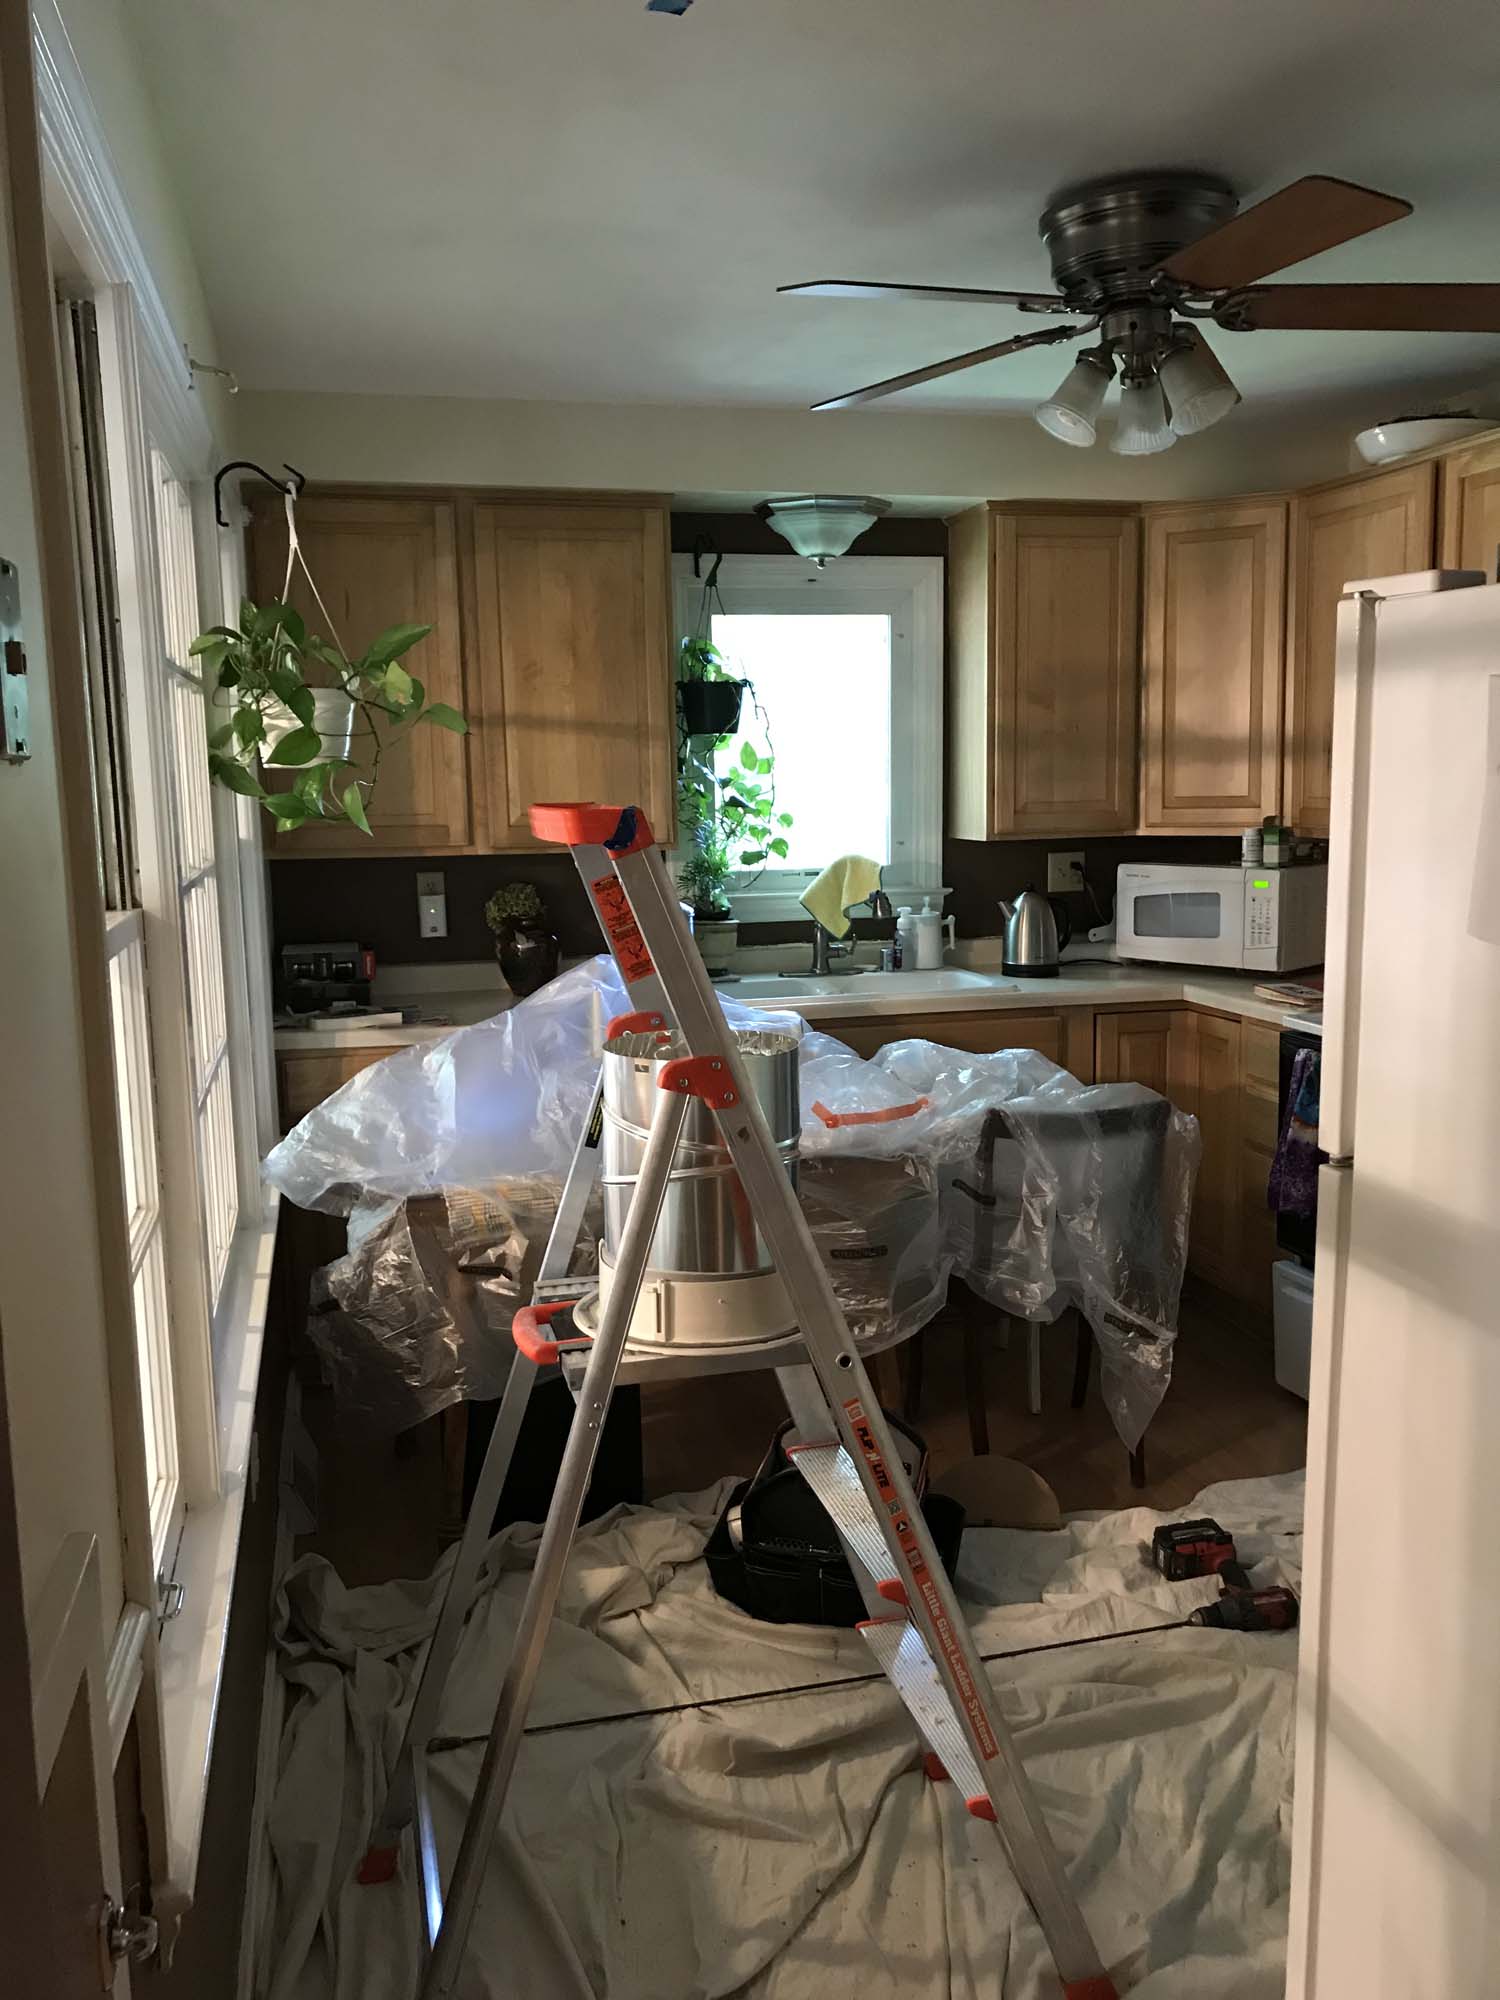 Employees prepare a kitchen for a new skylight ladders and drop-cloths